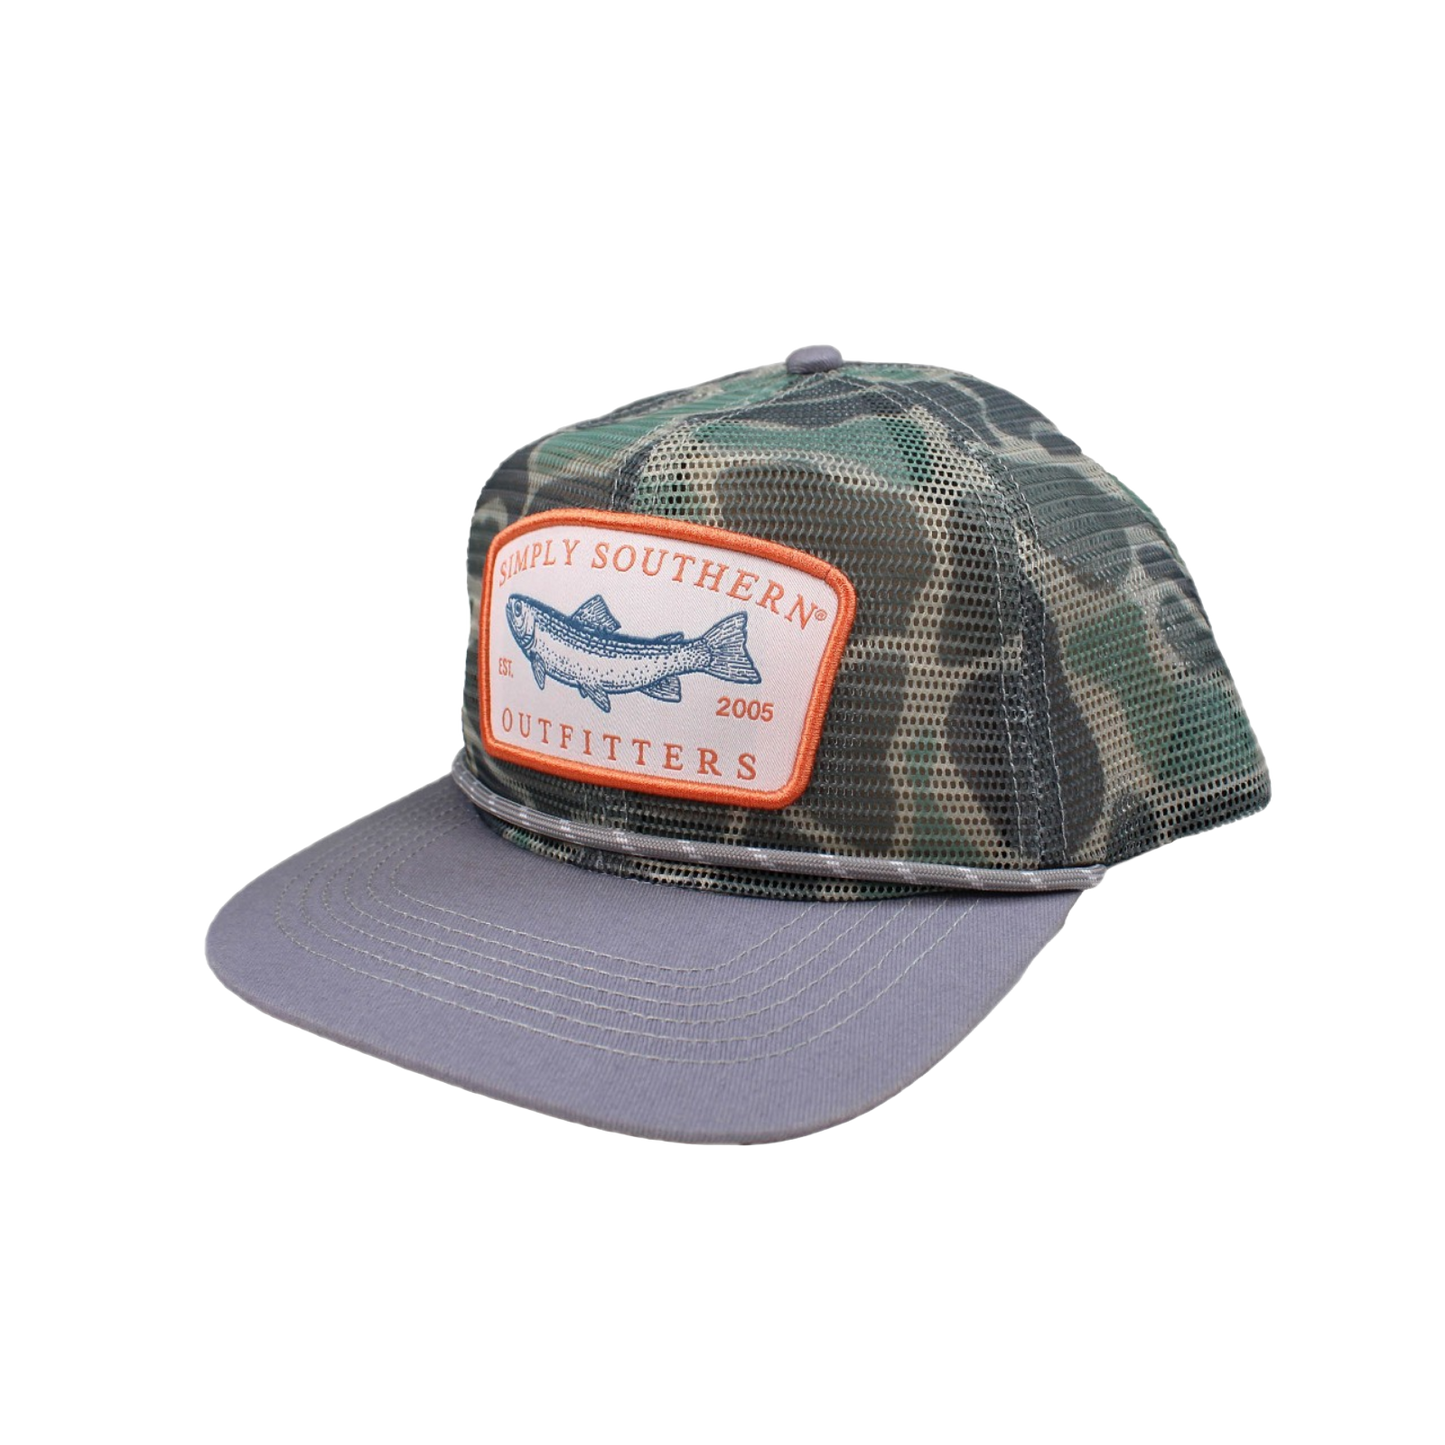 Simply Southern Men's Fish Camo Snapback Hat 0124-MN-HAT-CURVED-FISH